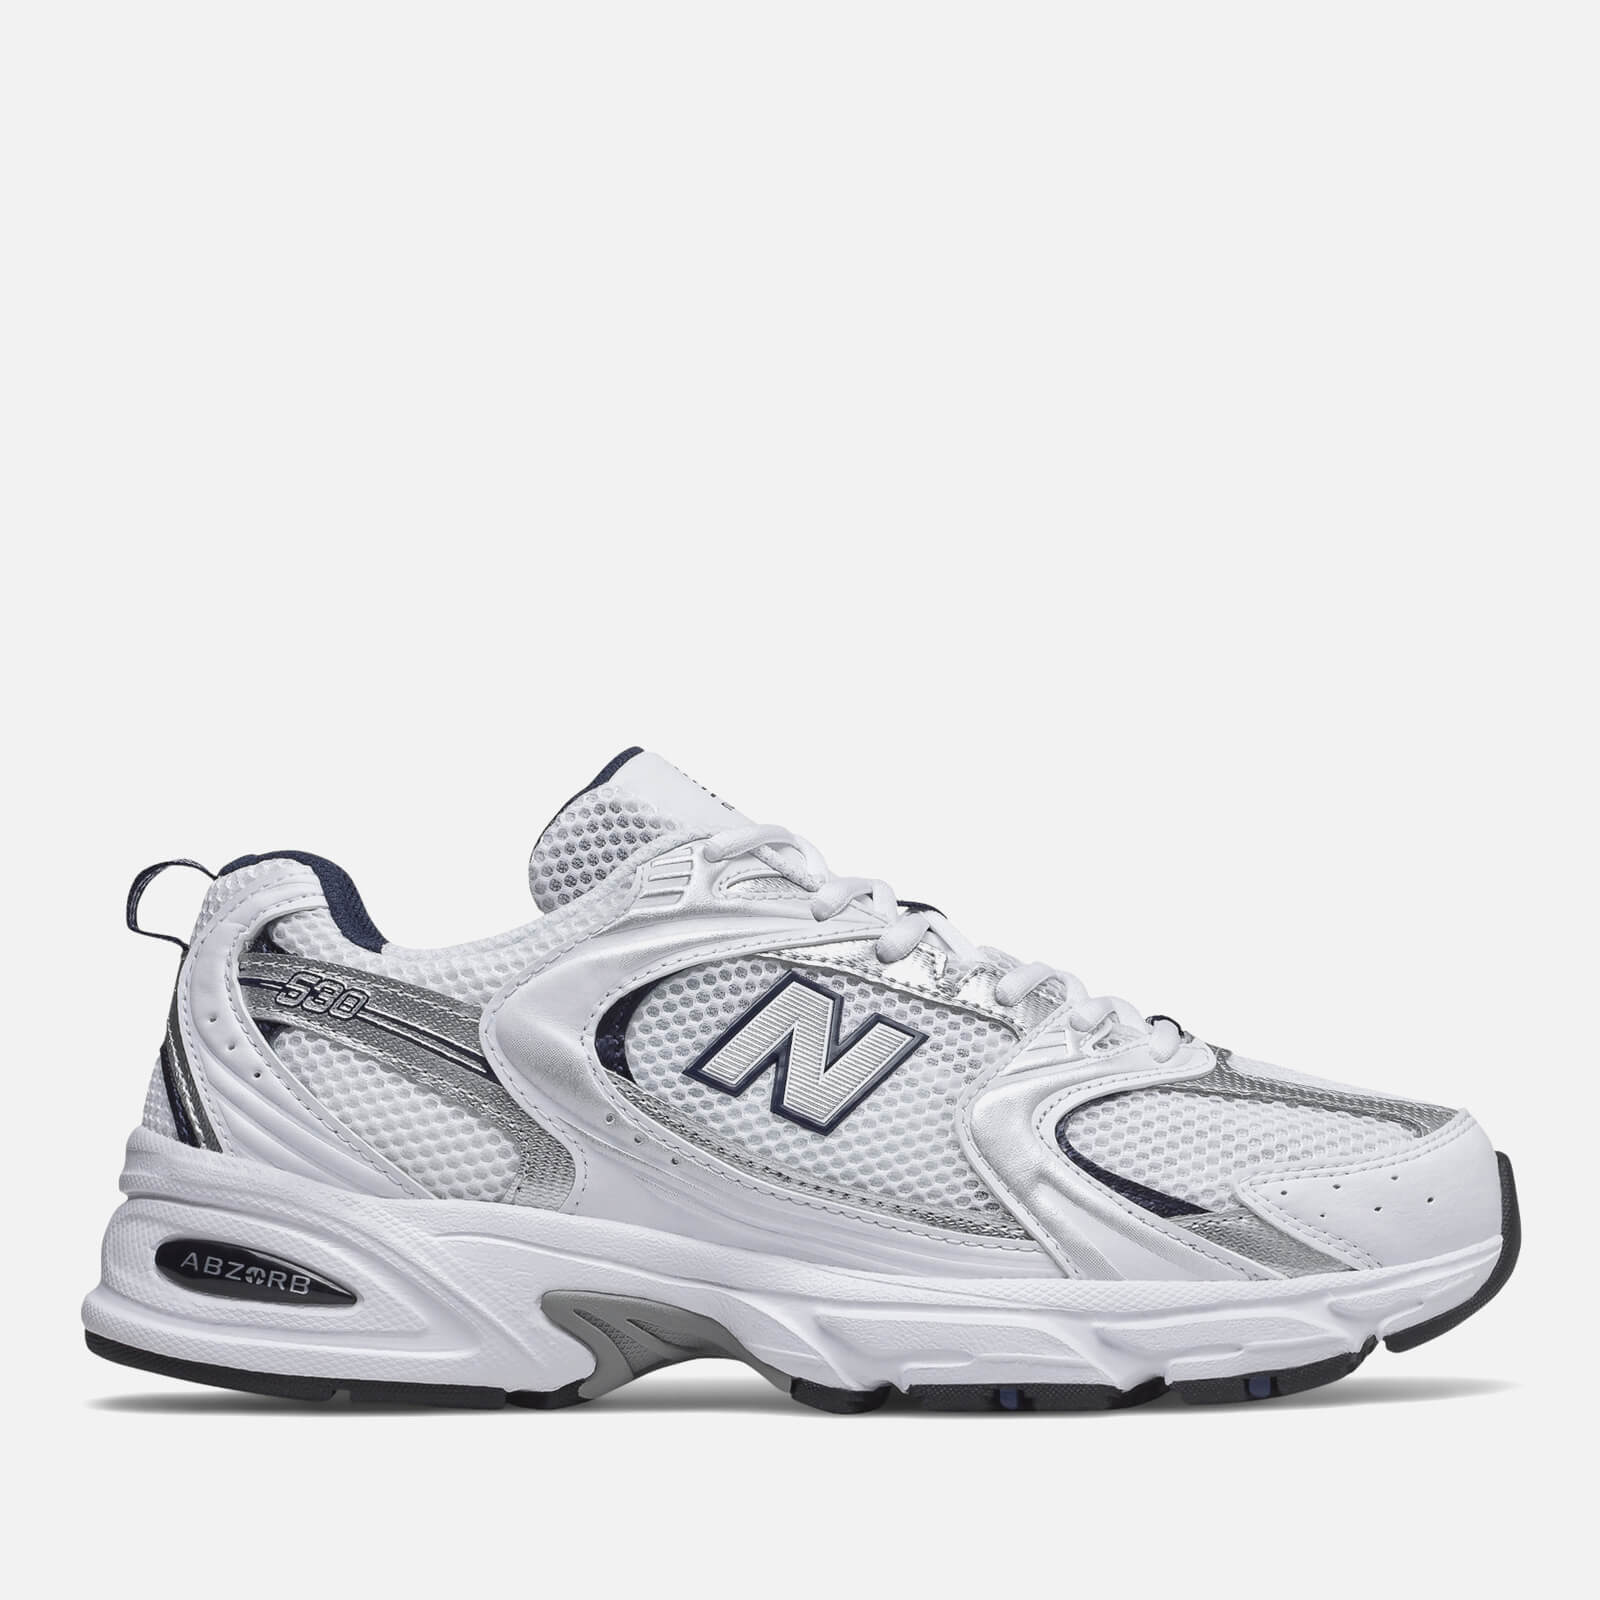 New Balance 530 Mesh and Leather Trainers - UK 8